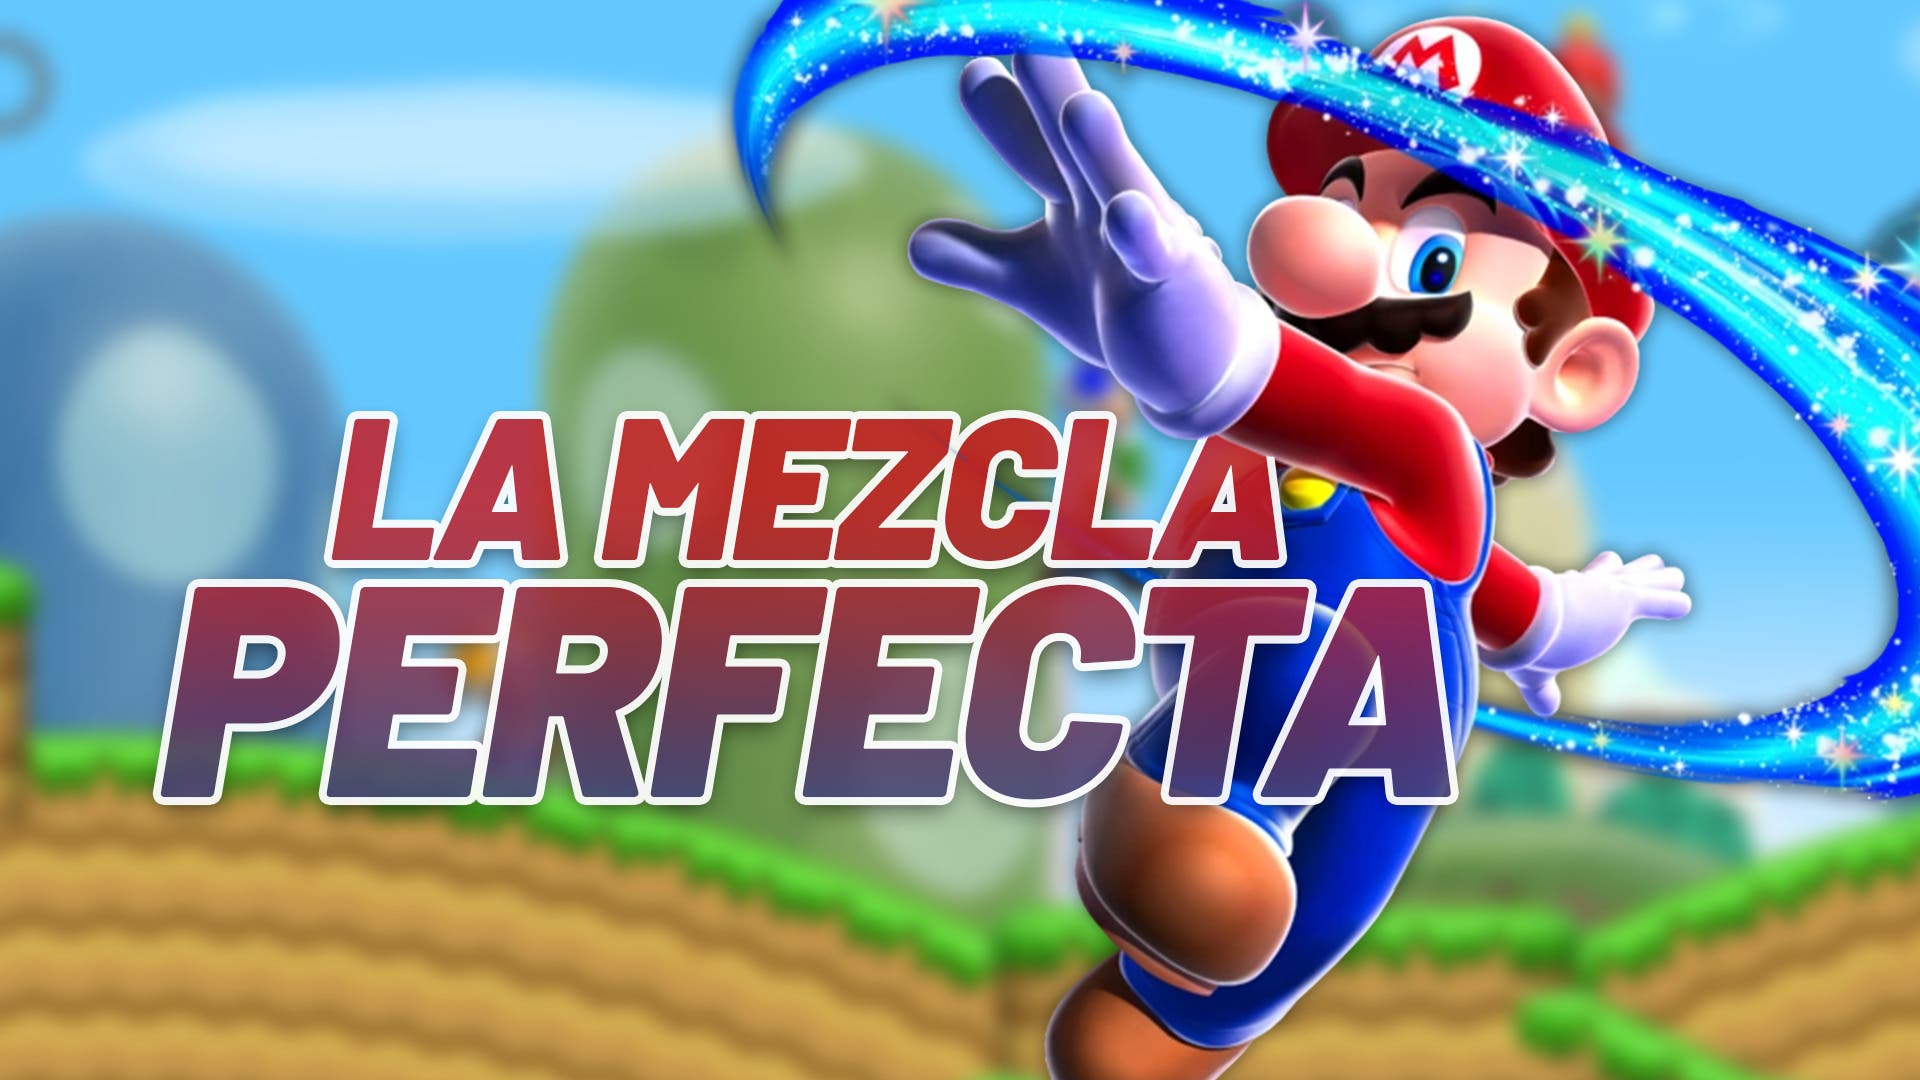 It is the combination of New Super Mario Bros.  and Super Mario Galaxy you’ll want to try